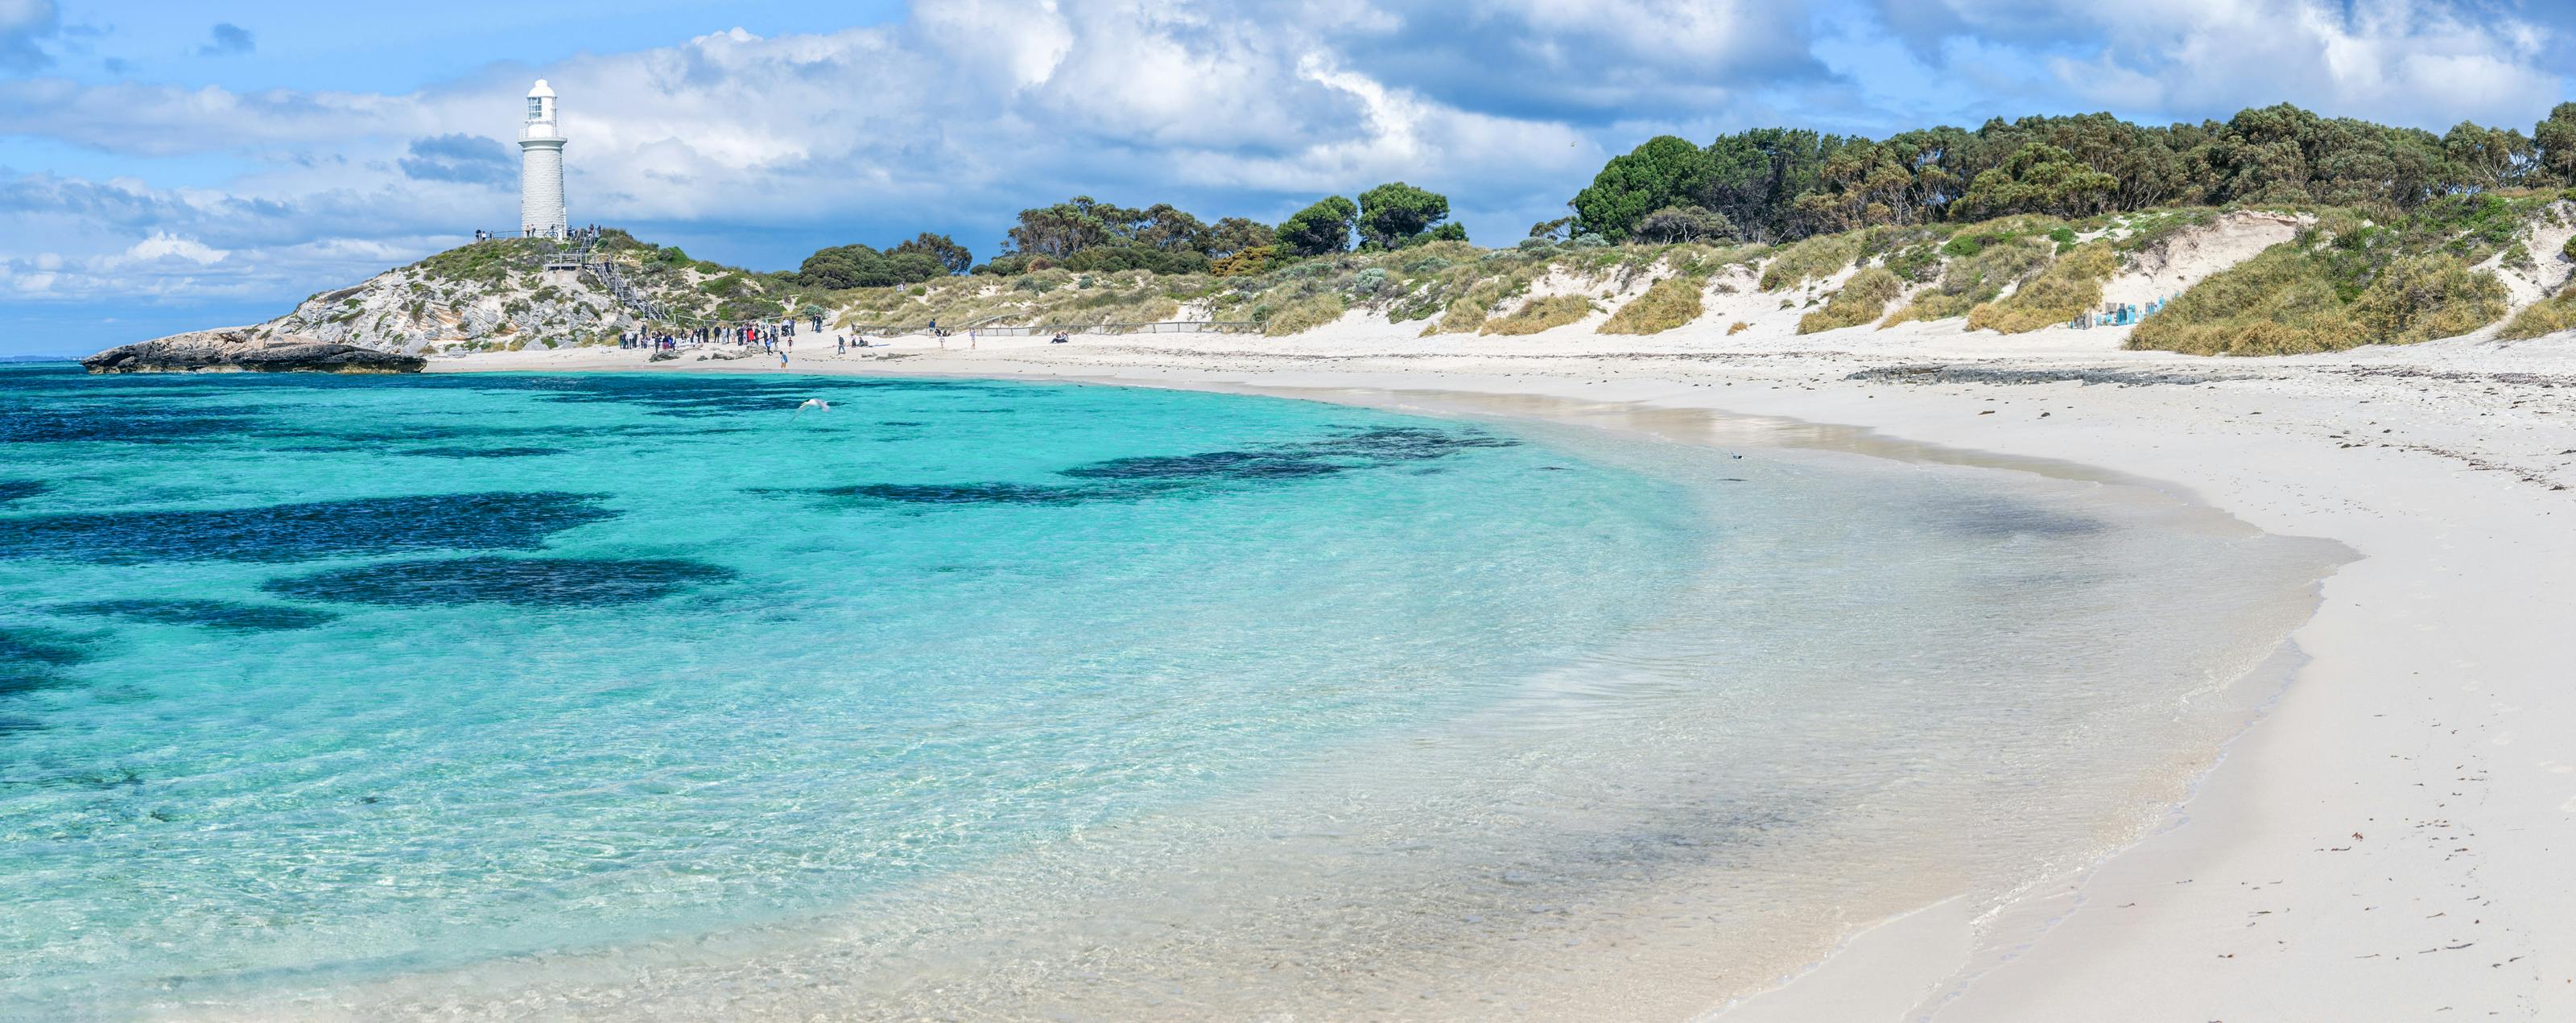 Rottnest bike rental with optional snorkeling experience from Perth Musement